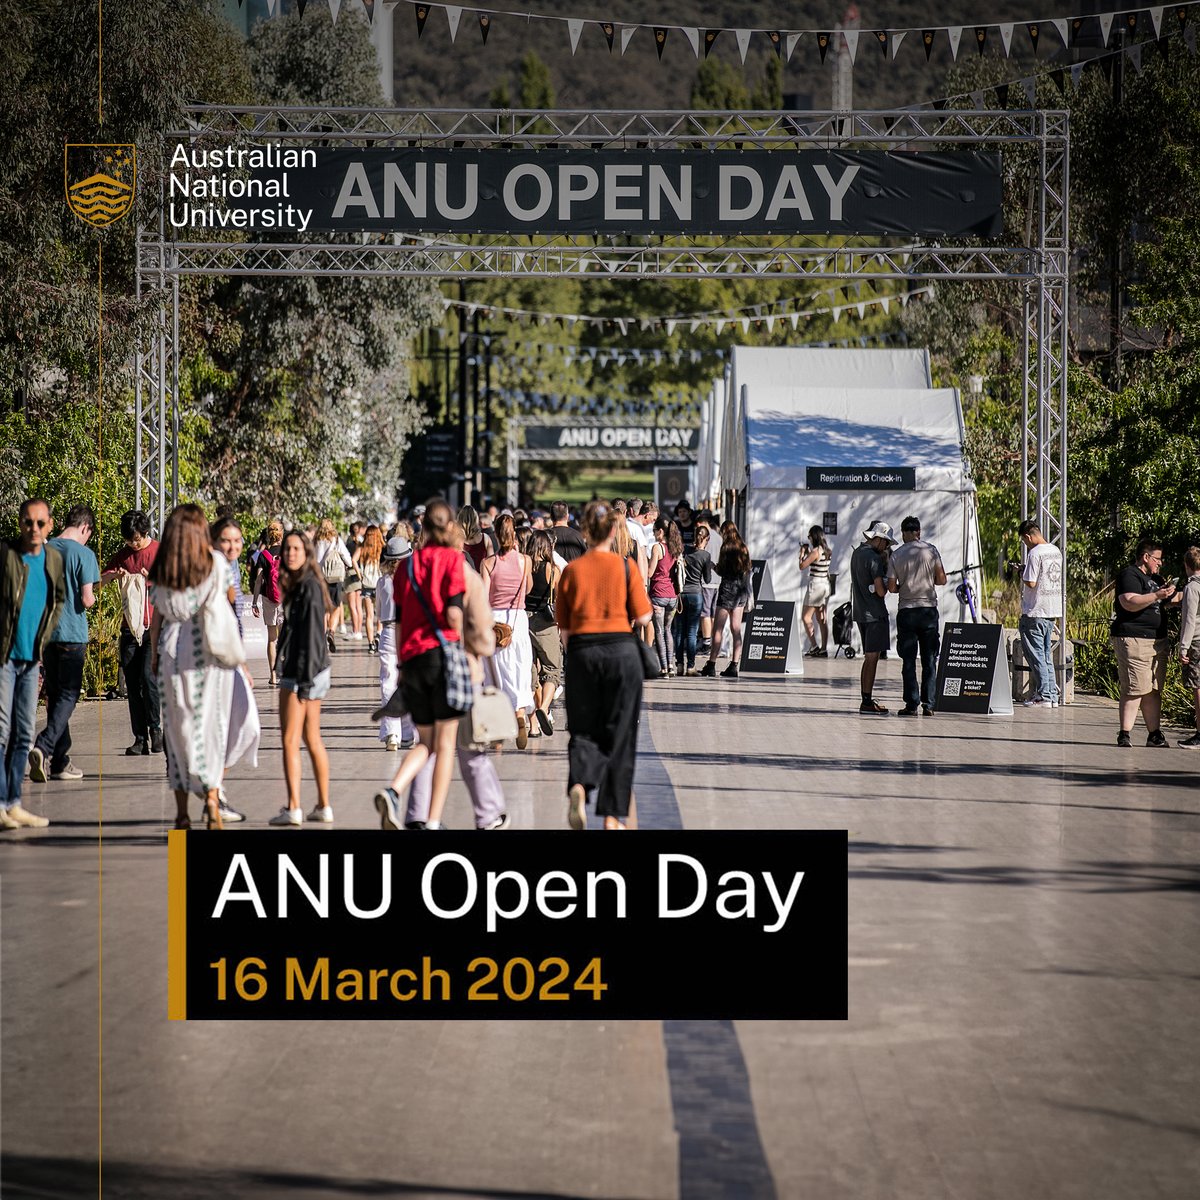 Interested in exploring the Asia-Pacific's #cultures and #languages, or becoming a #strategic advisor in solving #international crises? Come to our #ANUOpenDay sessions! International Security Studies quicklink.anu.edu.au/5ve0 Asian Studies and Languages quicklink.anu.edu.au/uz2o